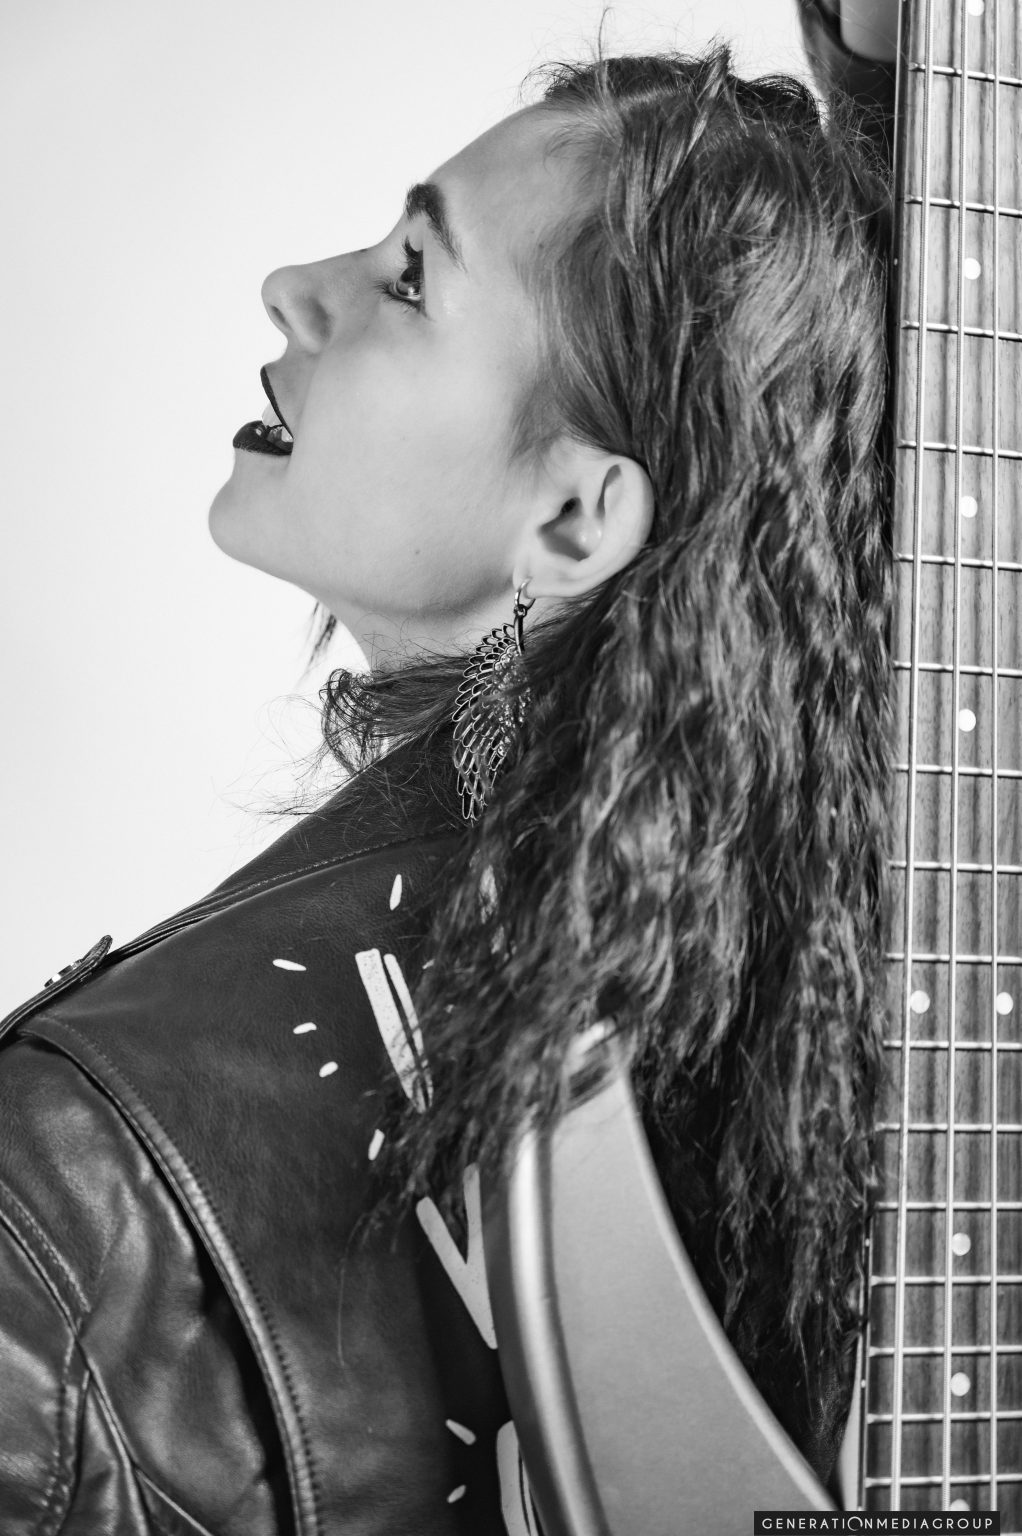 Portrait Photography of a young white femle model posing with a bass guitar